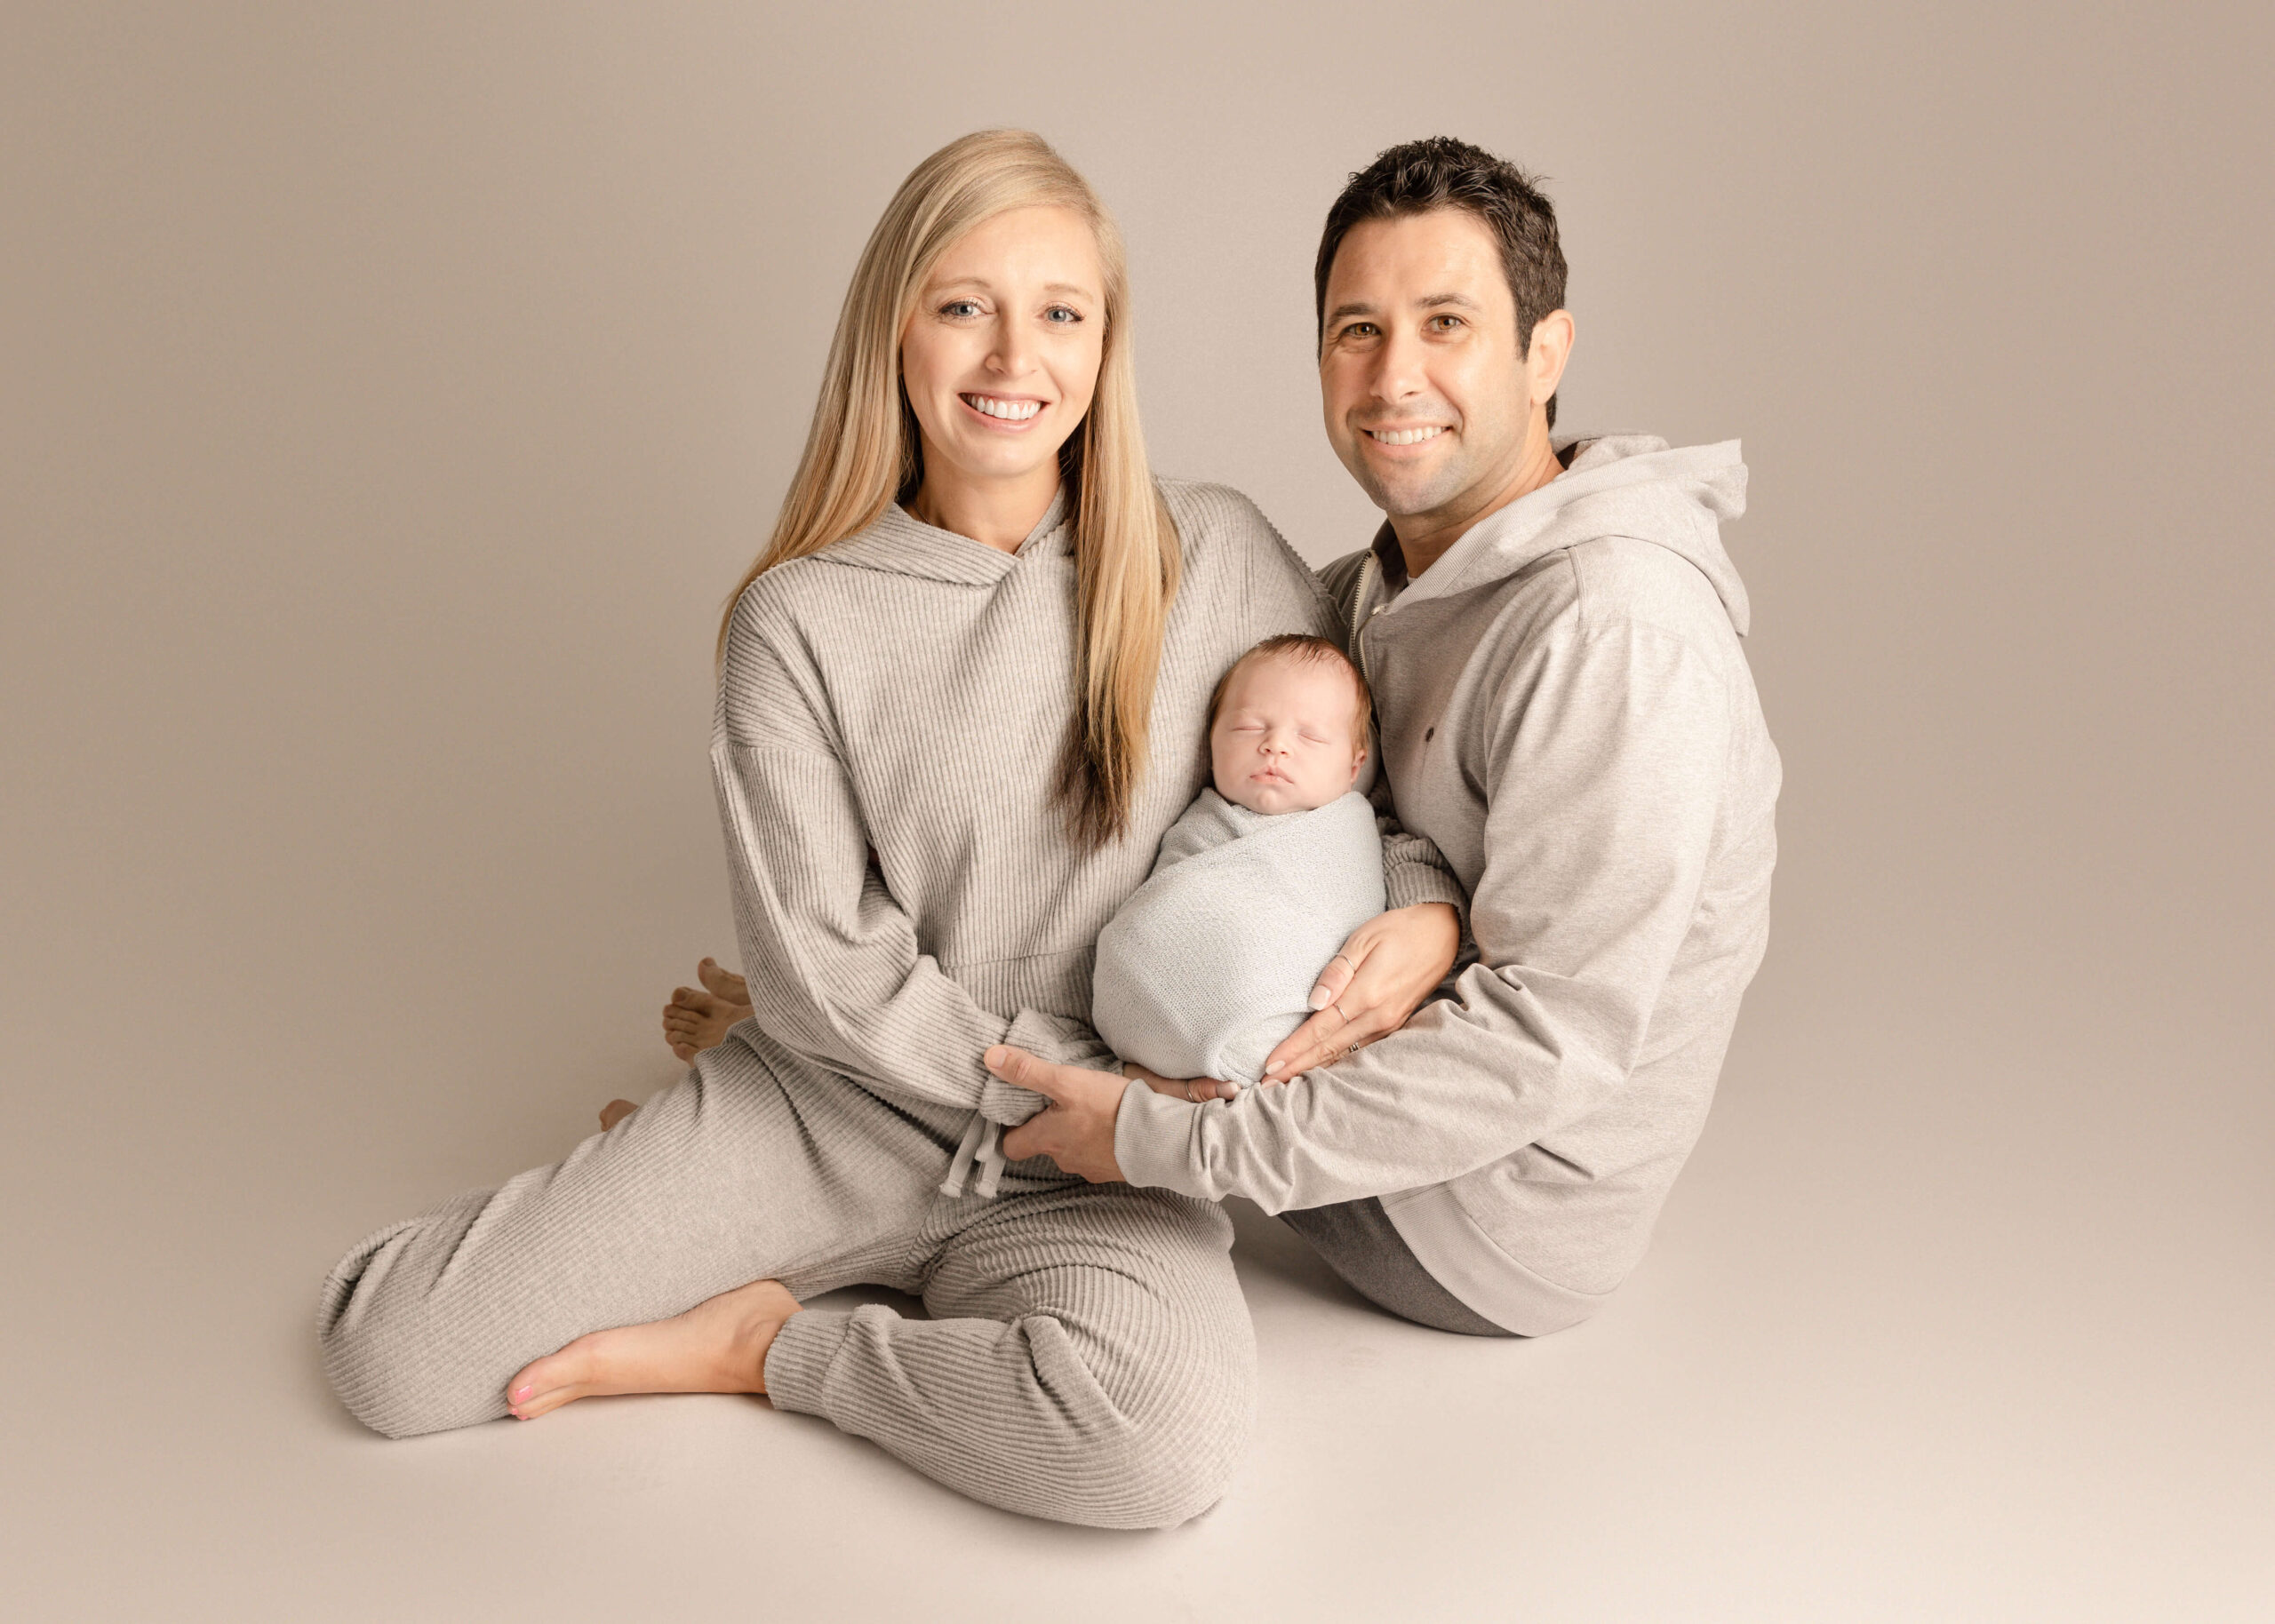 Parents sitting in sweat outfits on floor smiling holding the baby in studio in Orange County, CA by Ashley Nicole Photography.